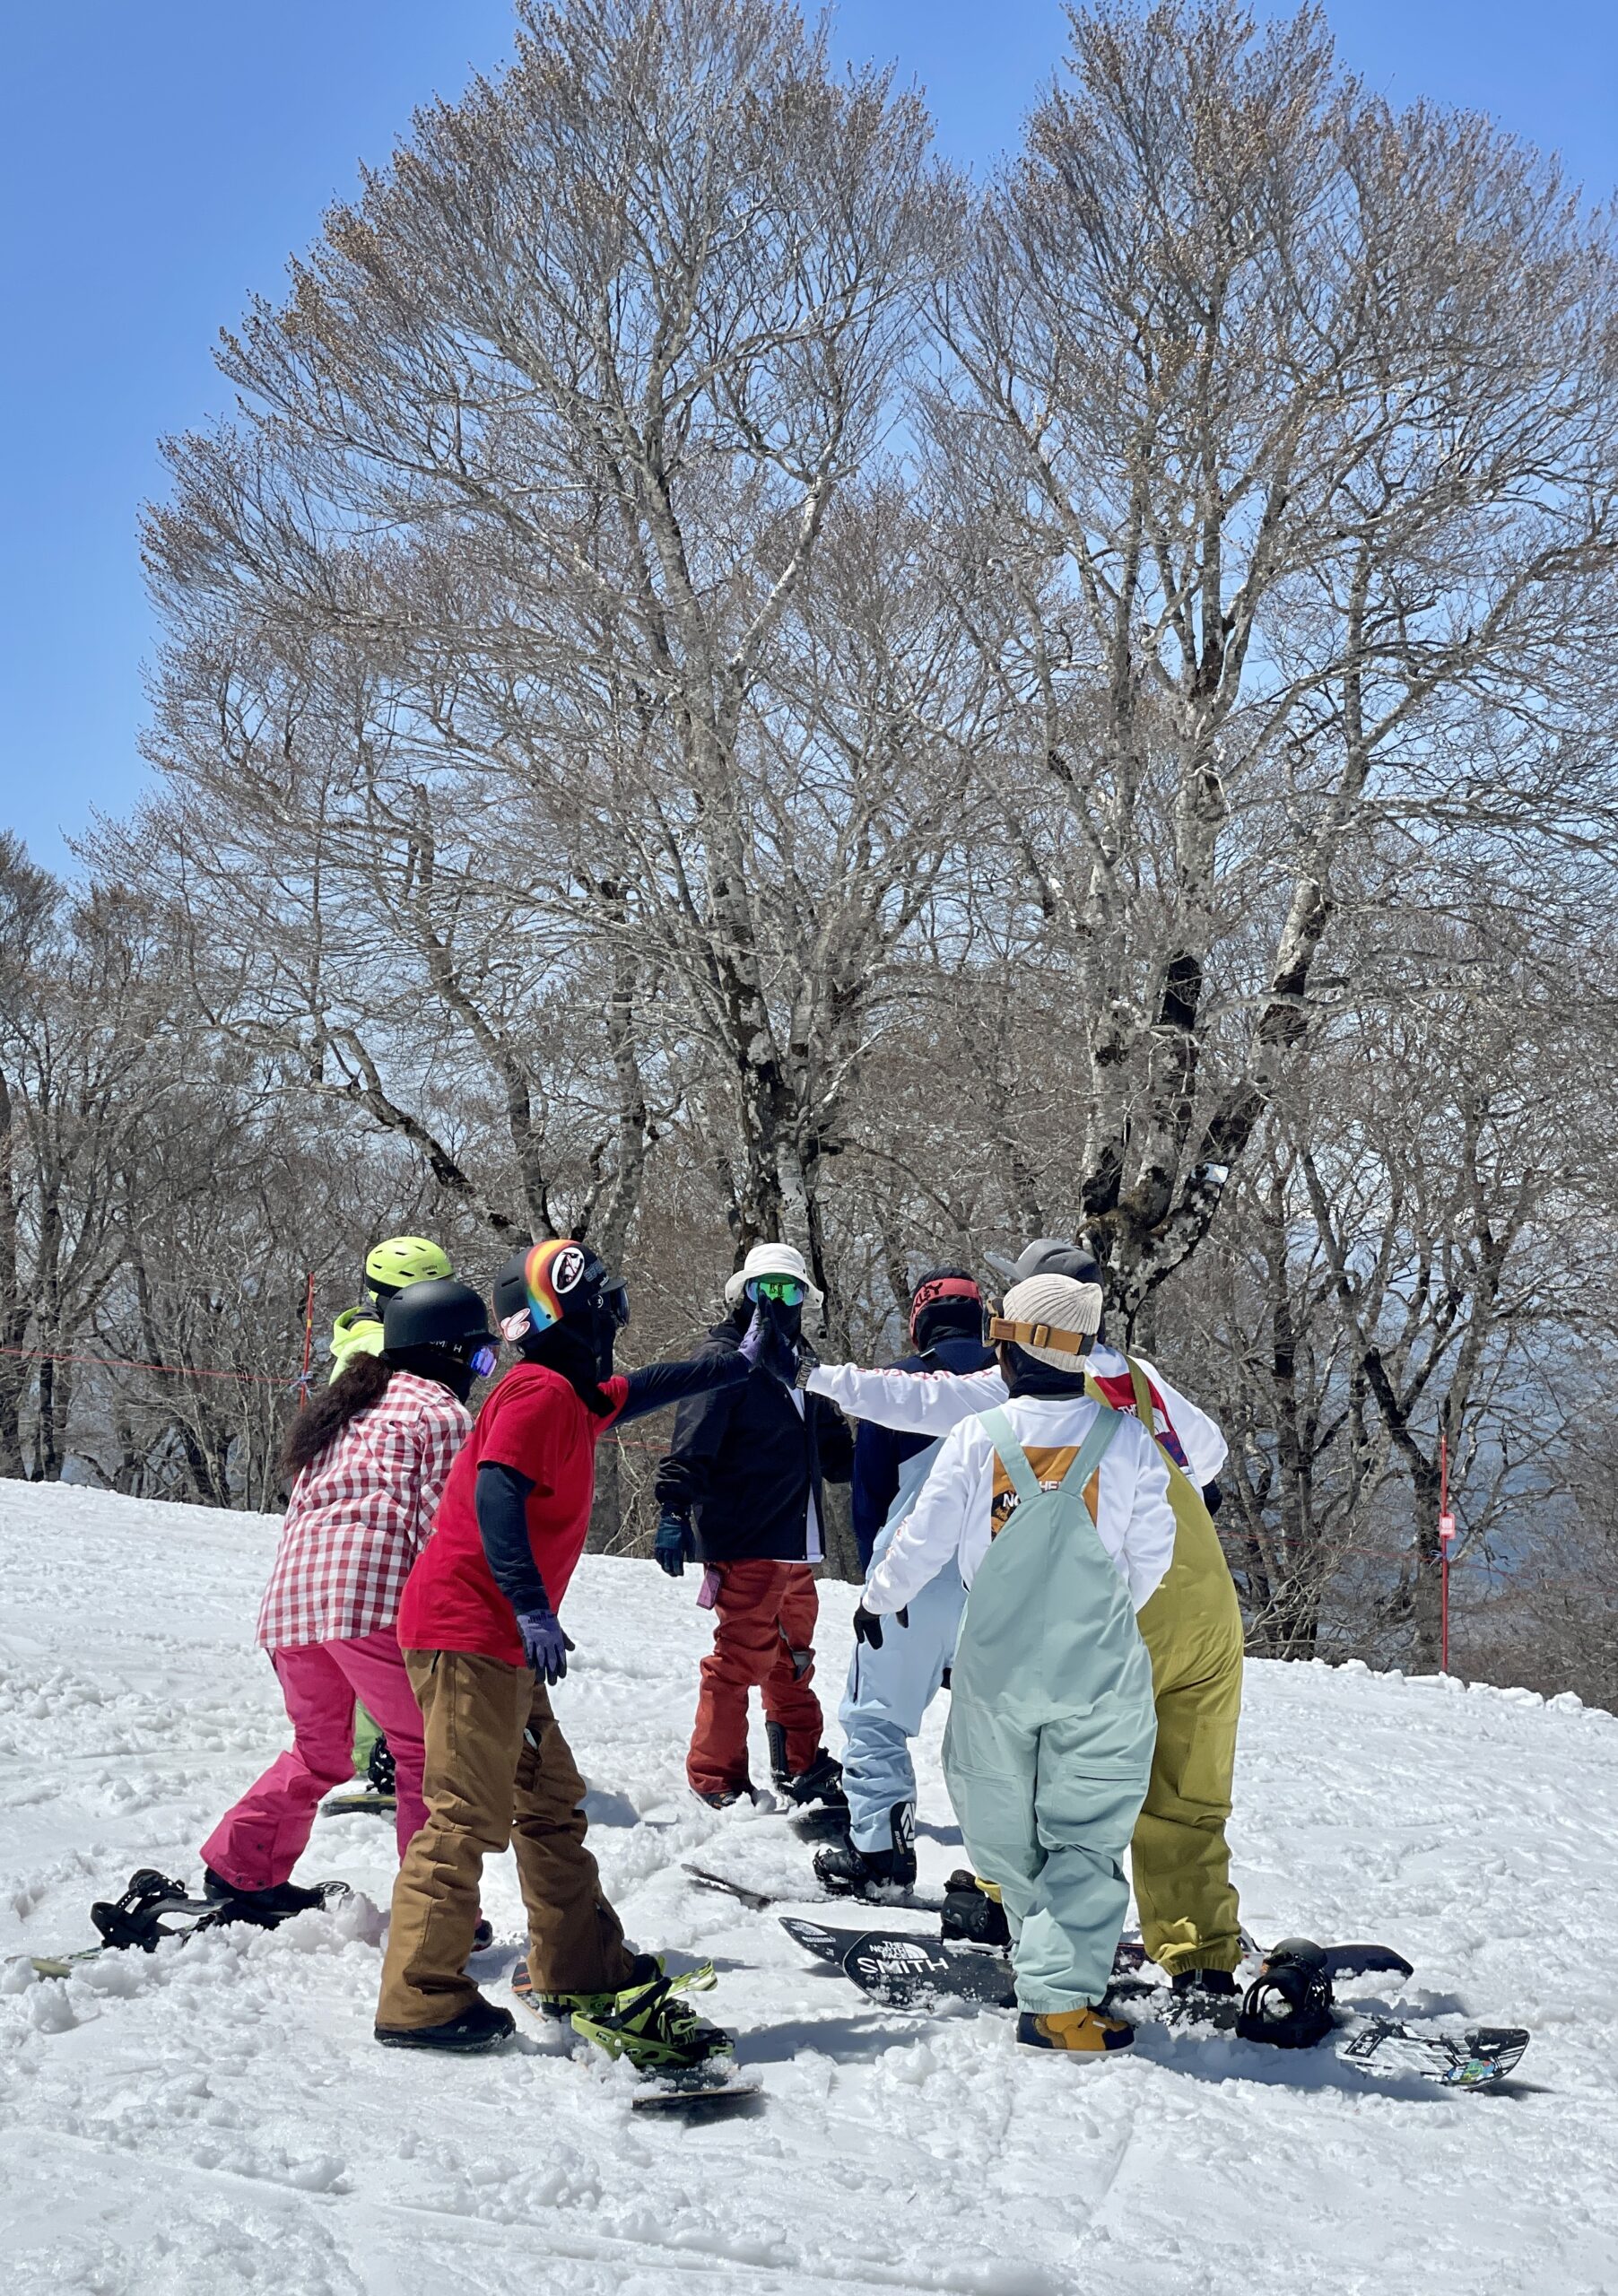 No better way to celebrate ending of the season with Nozawa Holidays with your close ones